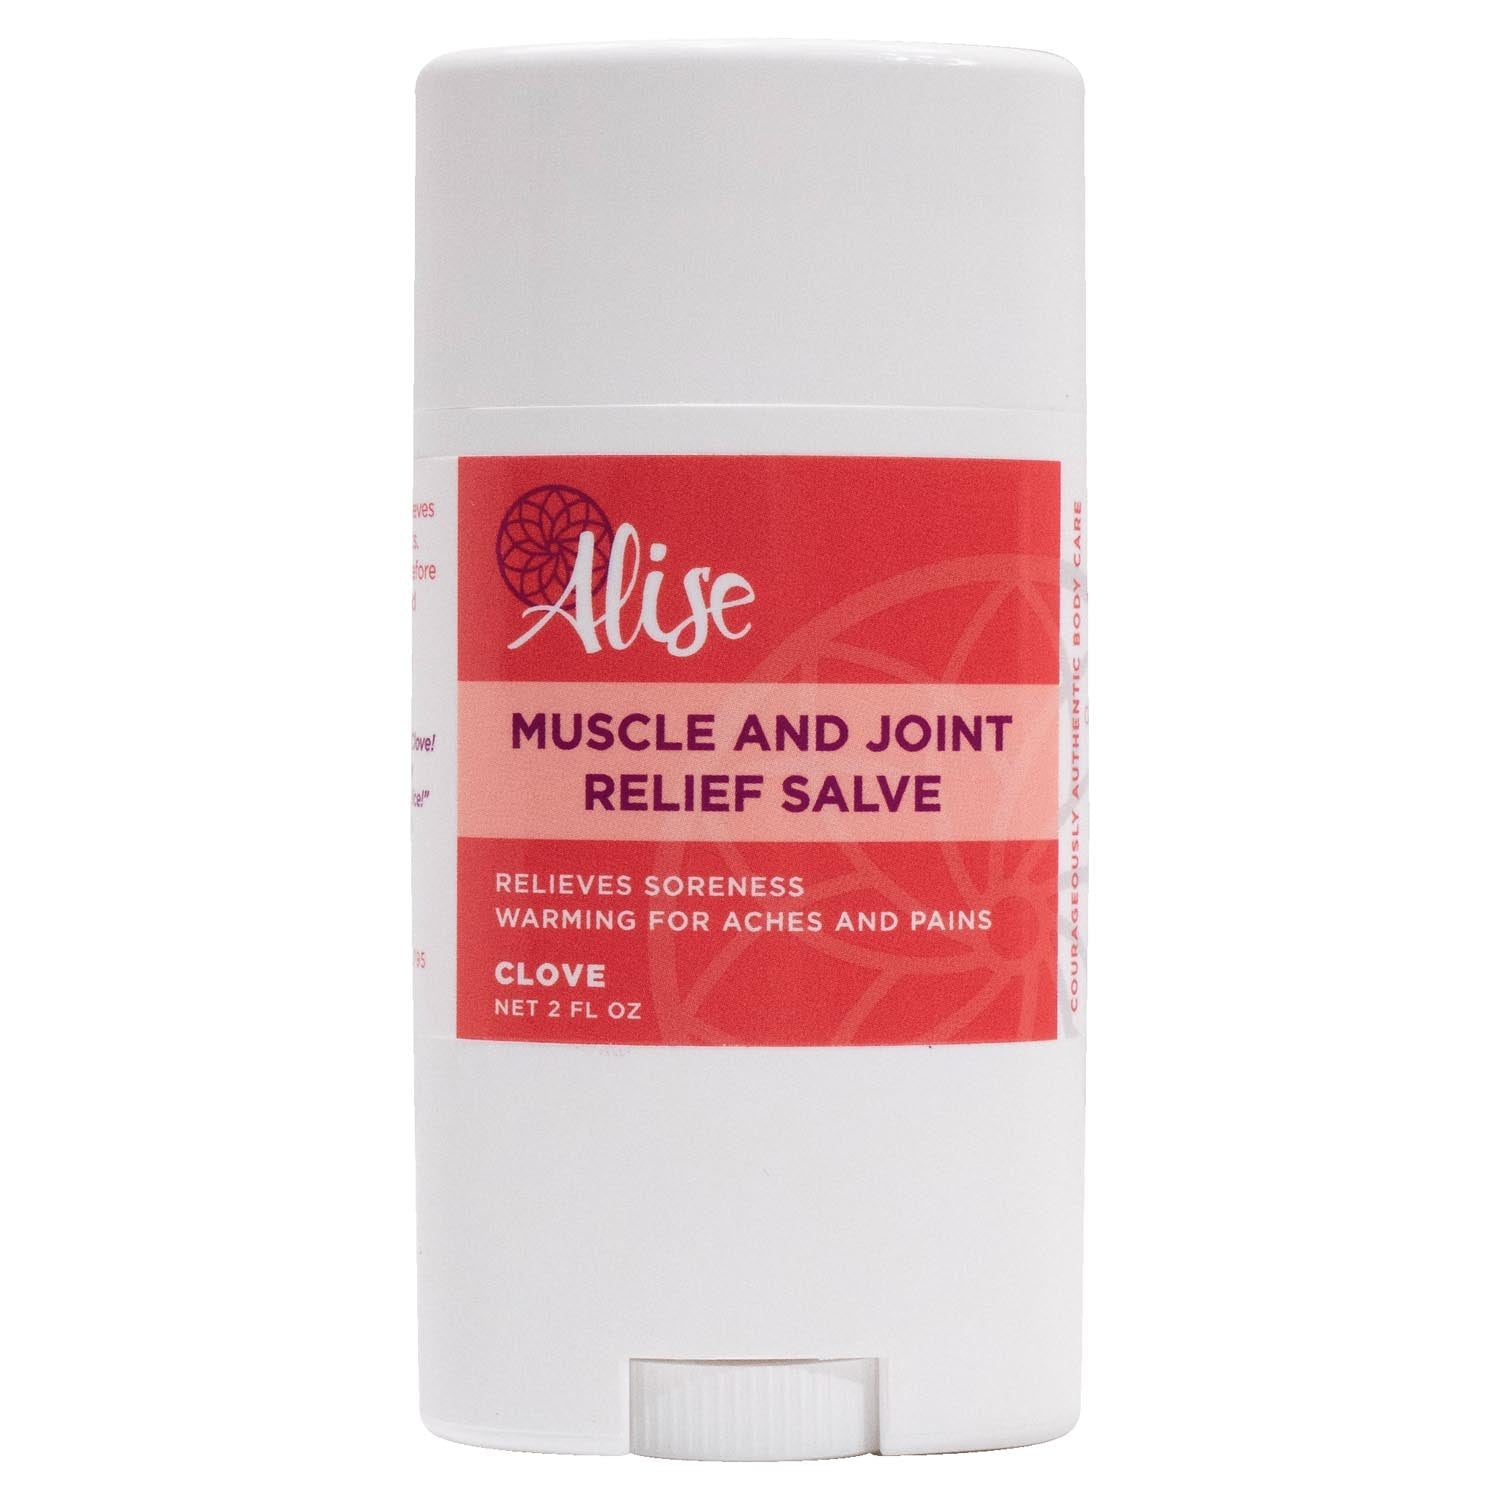 Muscle and Joint Relief Salve Warming Clove 2oz Rub On handcrafted by Alise Body Care